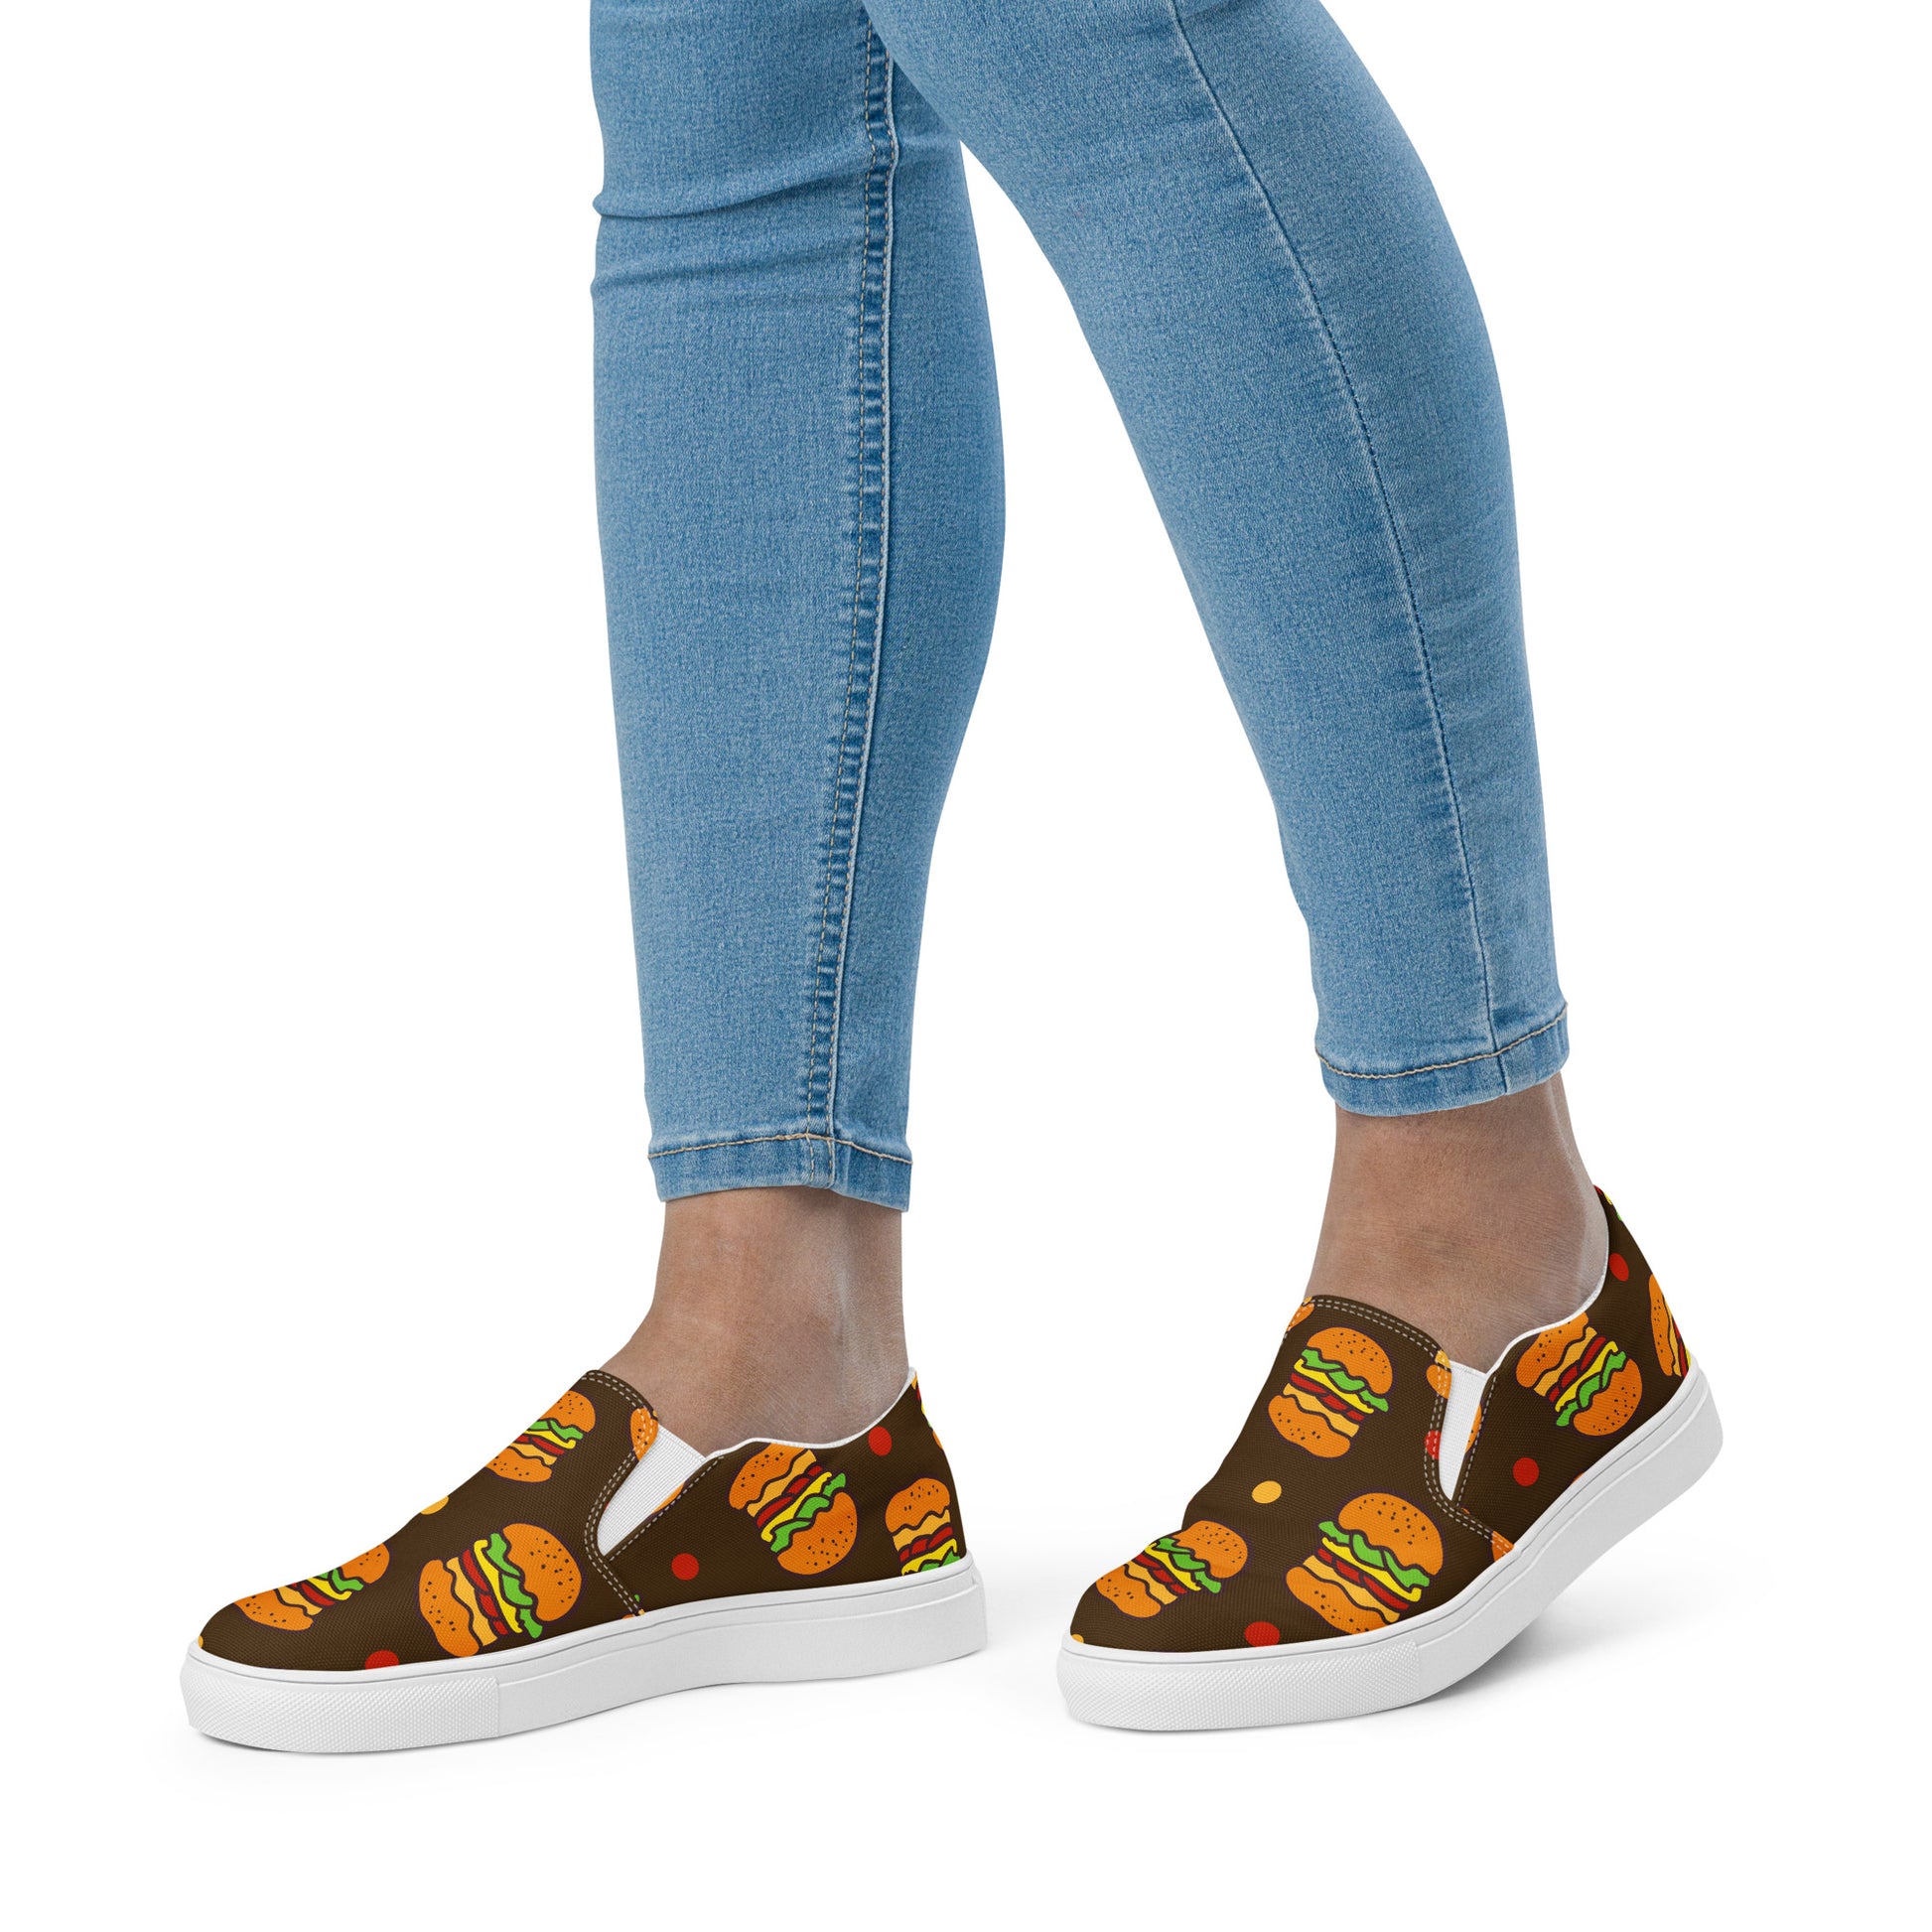 Burgers - Women’s slip-on canvas shoes Womens Slip On Shoes